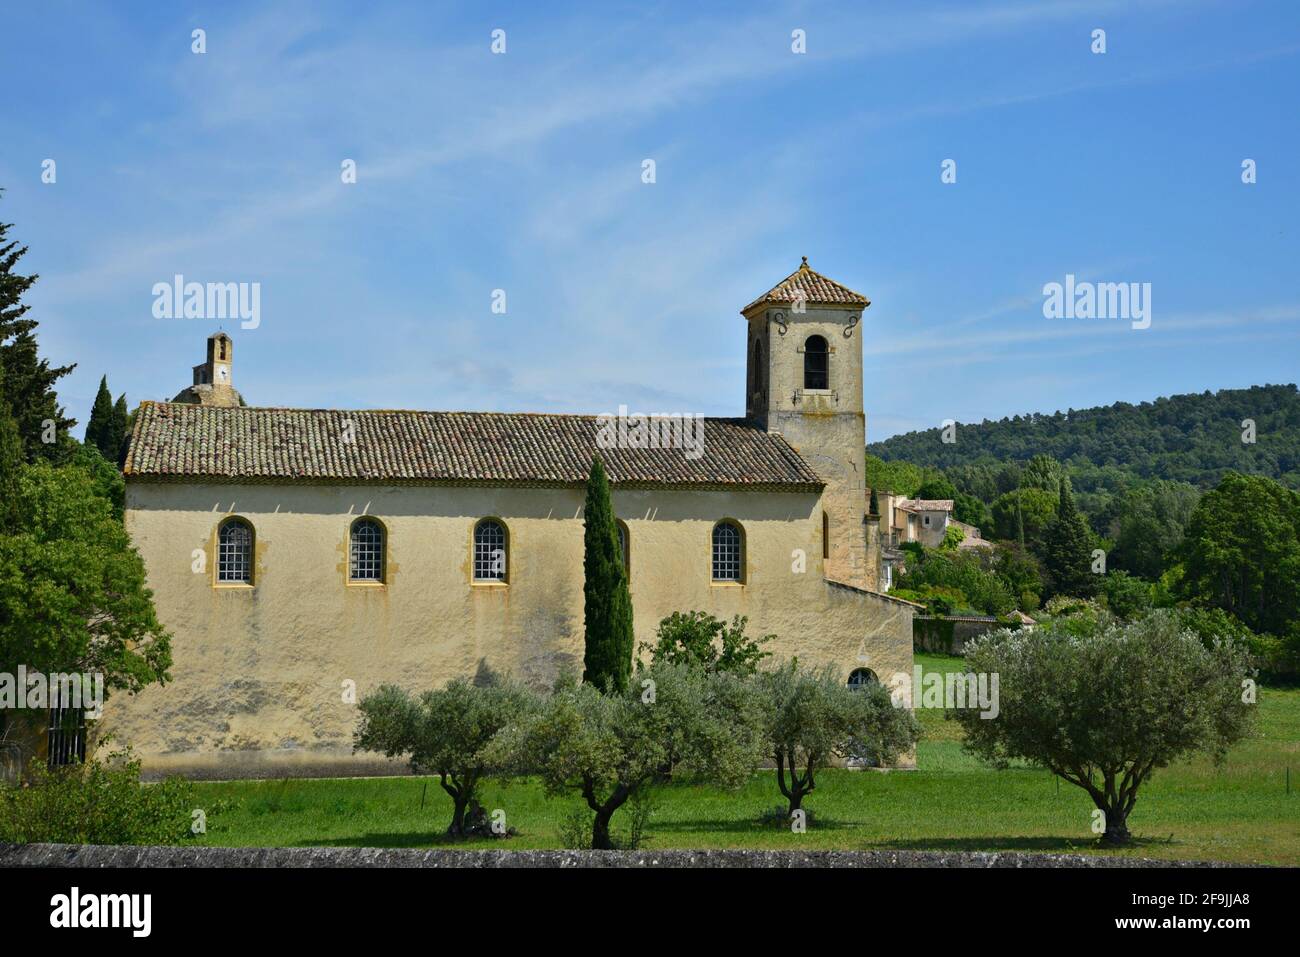 Landscape with scenic view of the Protestant Temple a landmark in the countryside of Lourmarin, Vaucluse Provence, France. Stock Photo